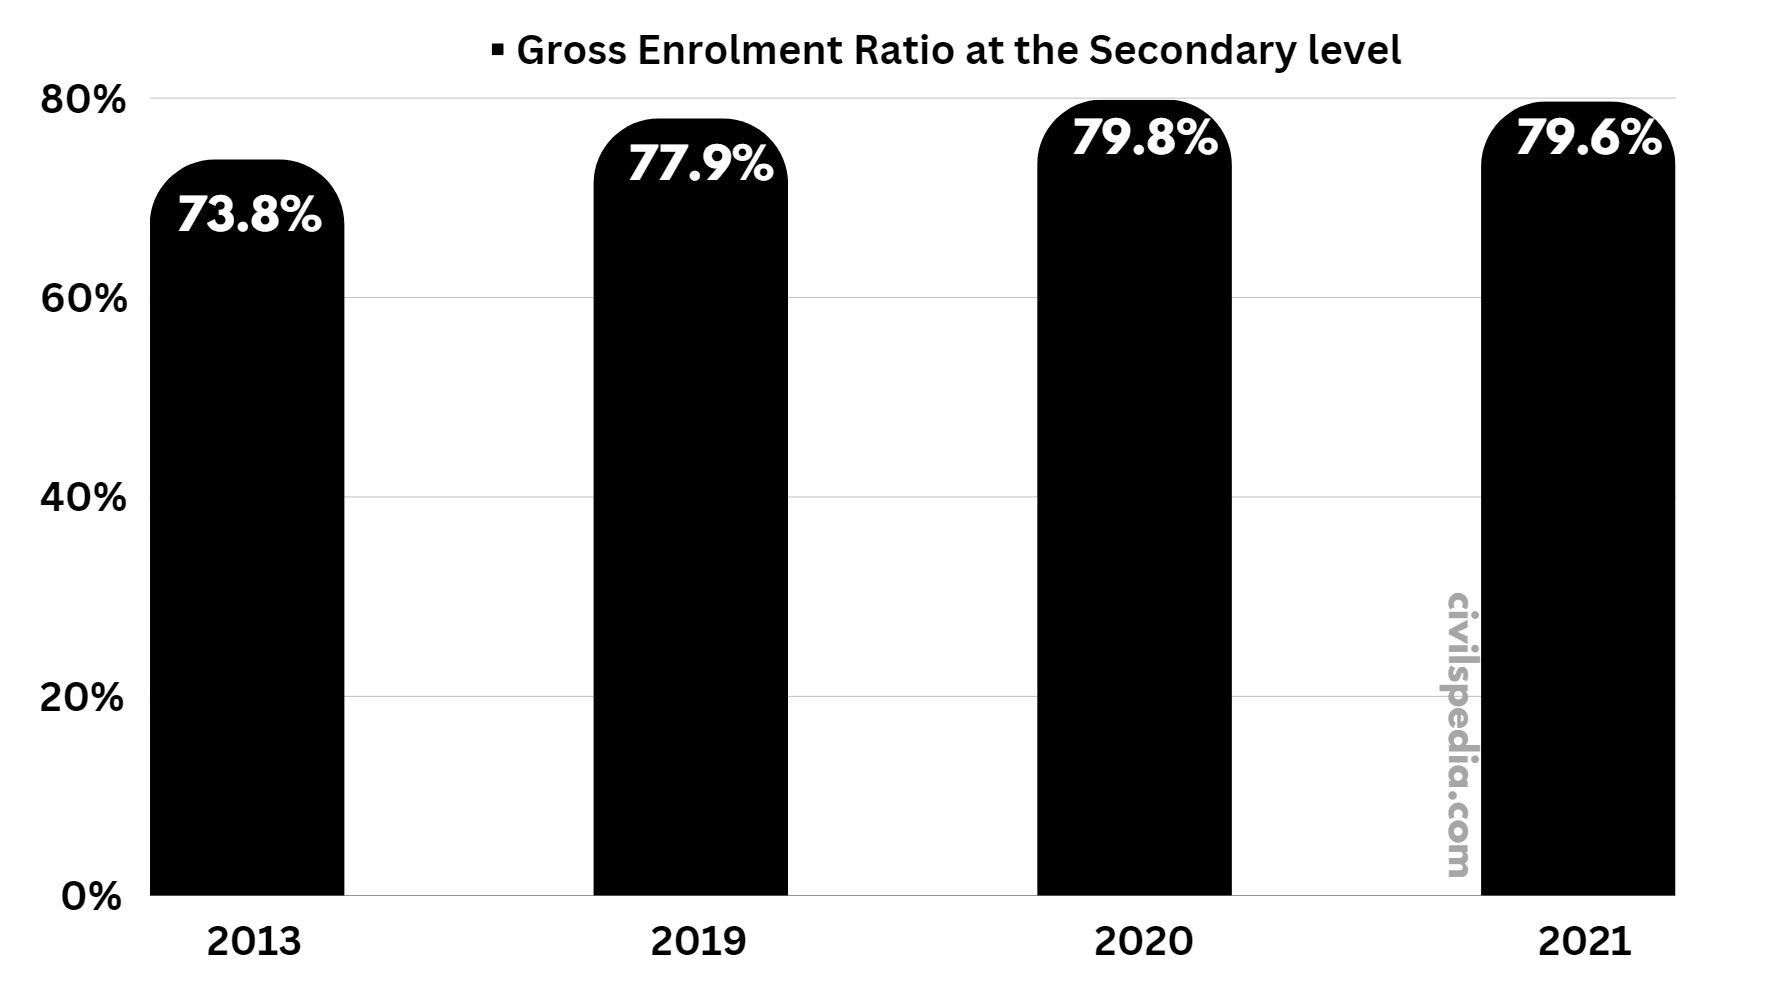 Trend of Gross Enrolment Ratio in India